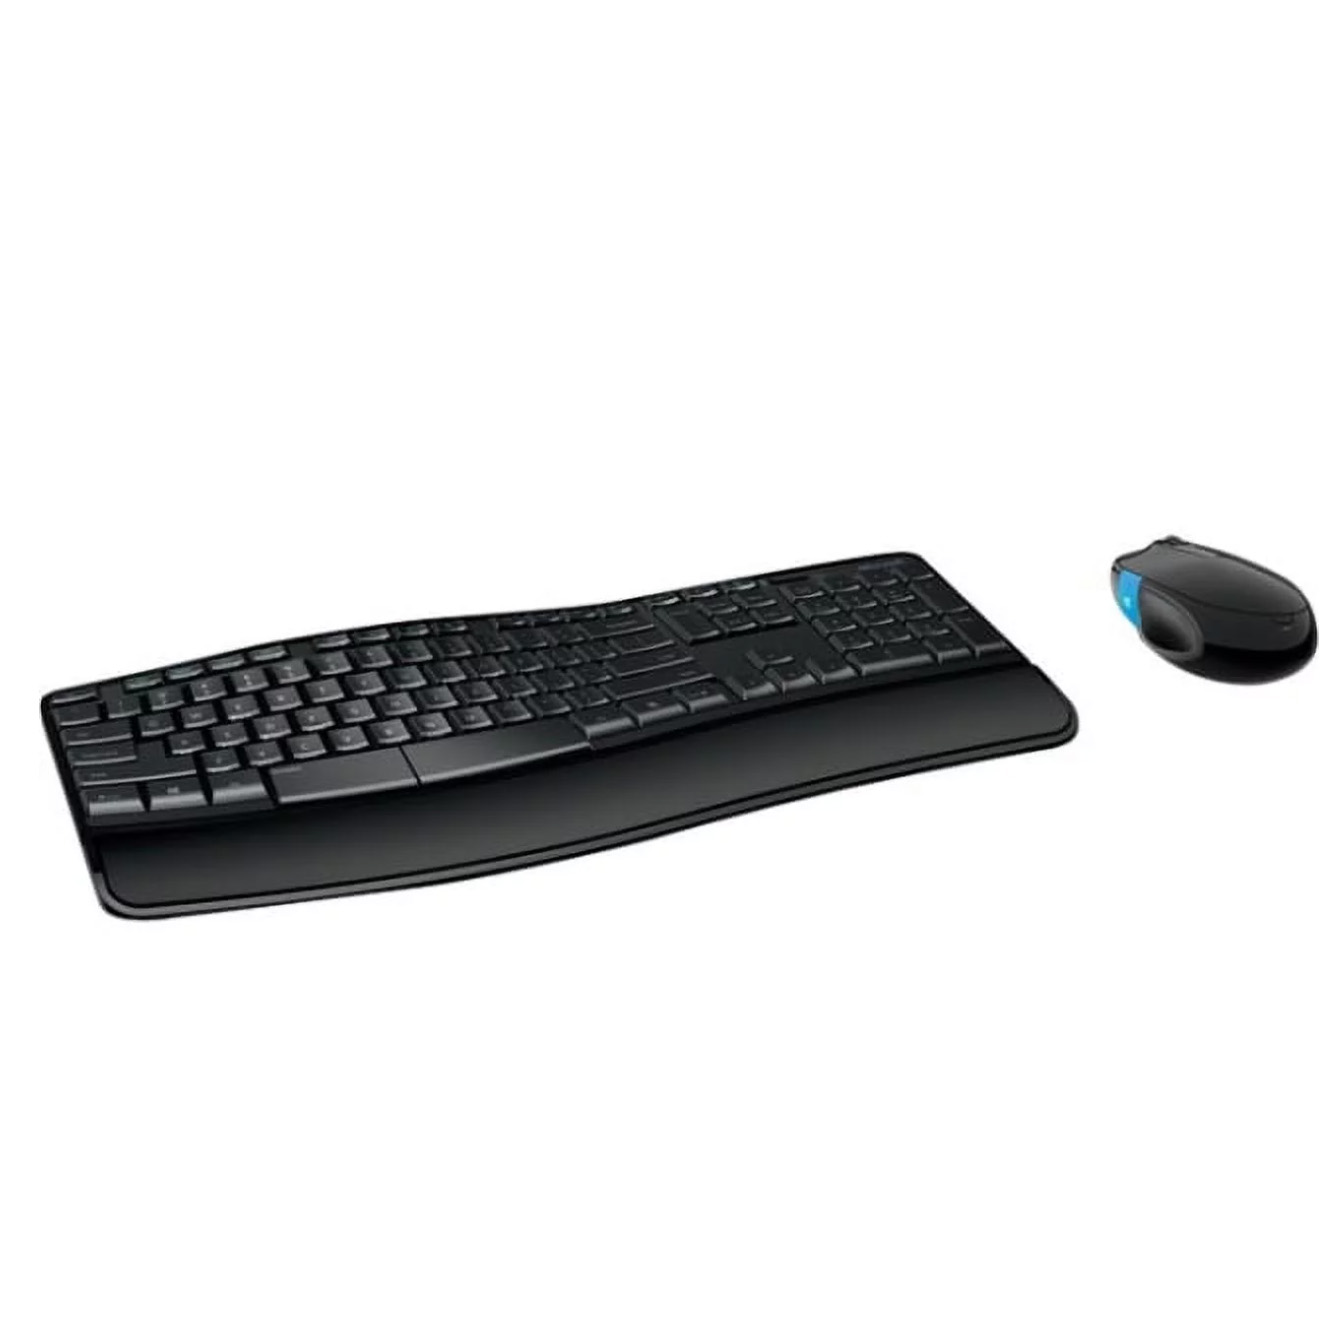 Microsoft Sculpt Wireless Keyboard and Mouse